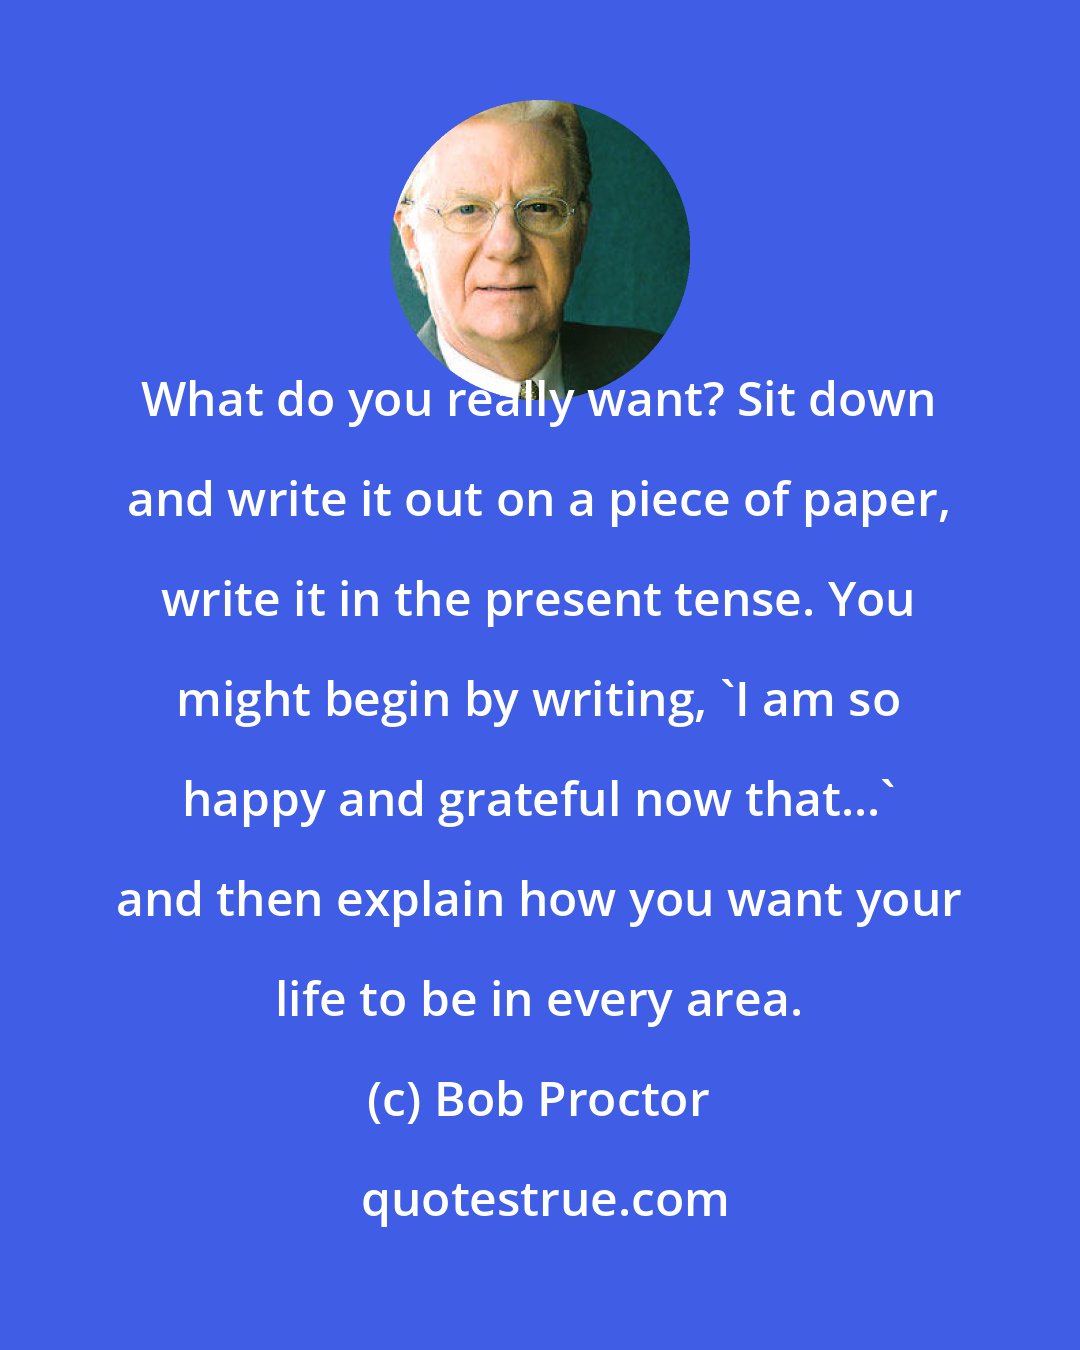 Bob Proctor: What do you really want? Sit down and write it out on a piece of paper, write it in the present tense. You might begin by writing, 'I am so happy and grateful now that...' and then explain how you want your life to be in every area.